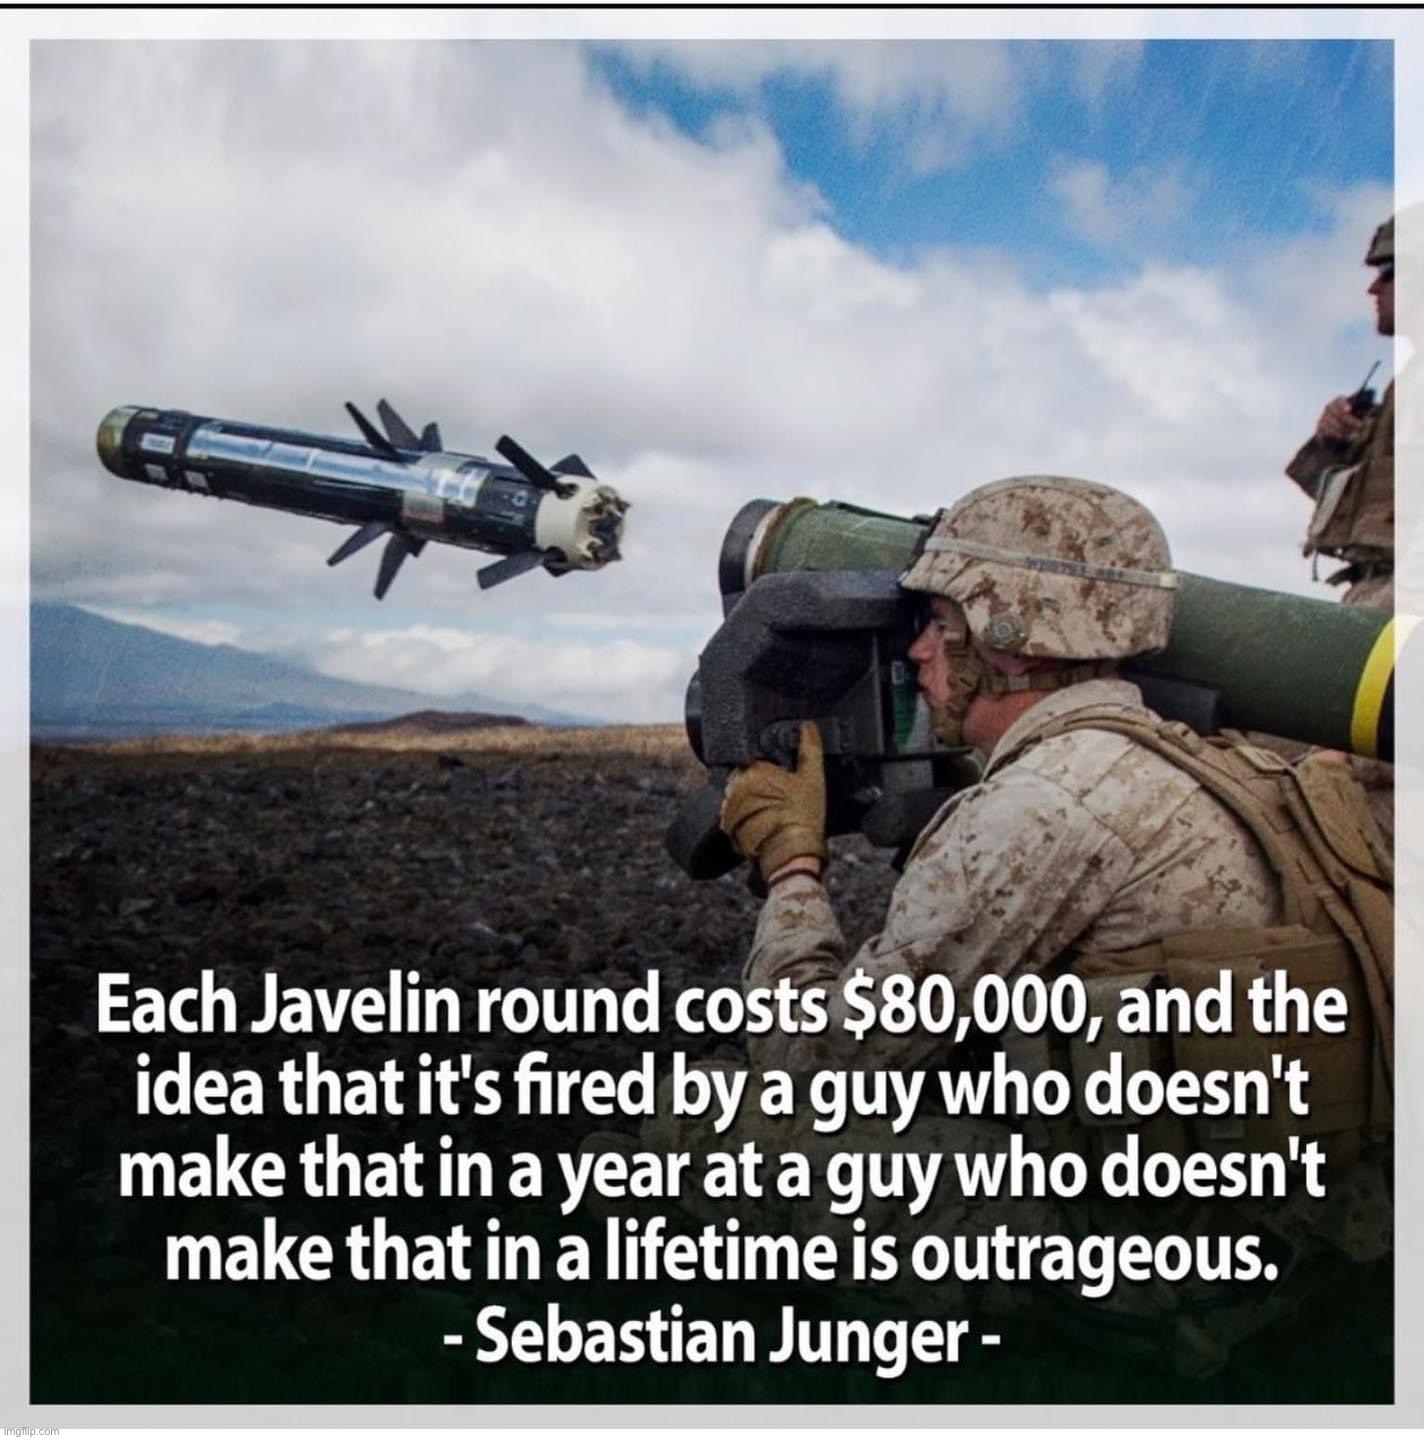 No no he’s got a point | image tagged in javelin rounds,war,anti-war,afghanistan,afghan war,no no he's got a point | made w/ Imgflip meme maker